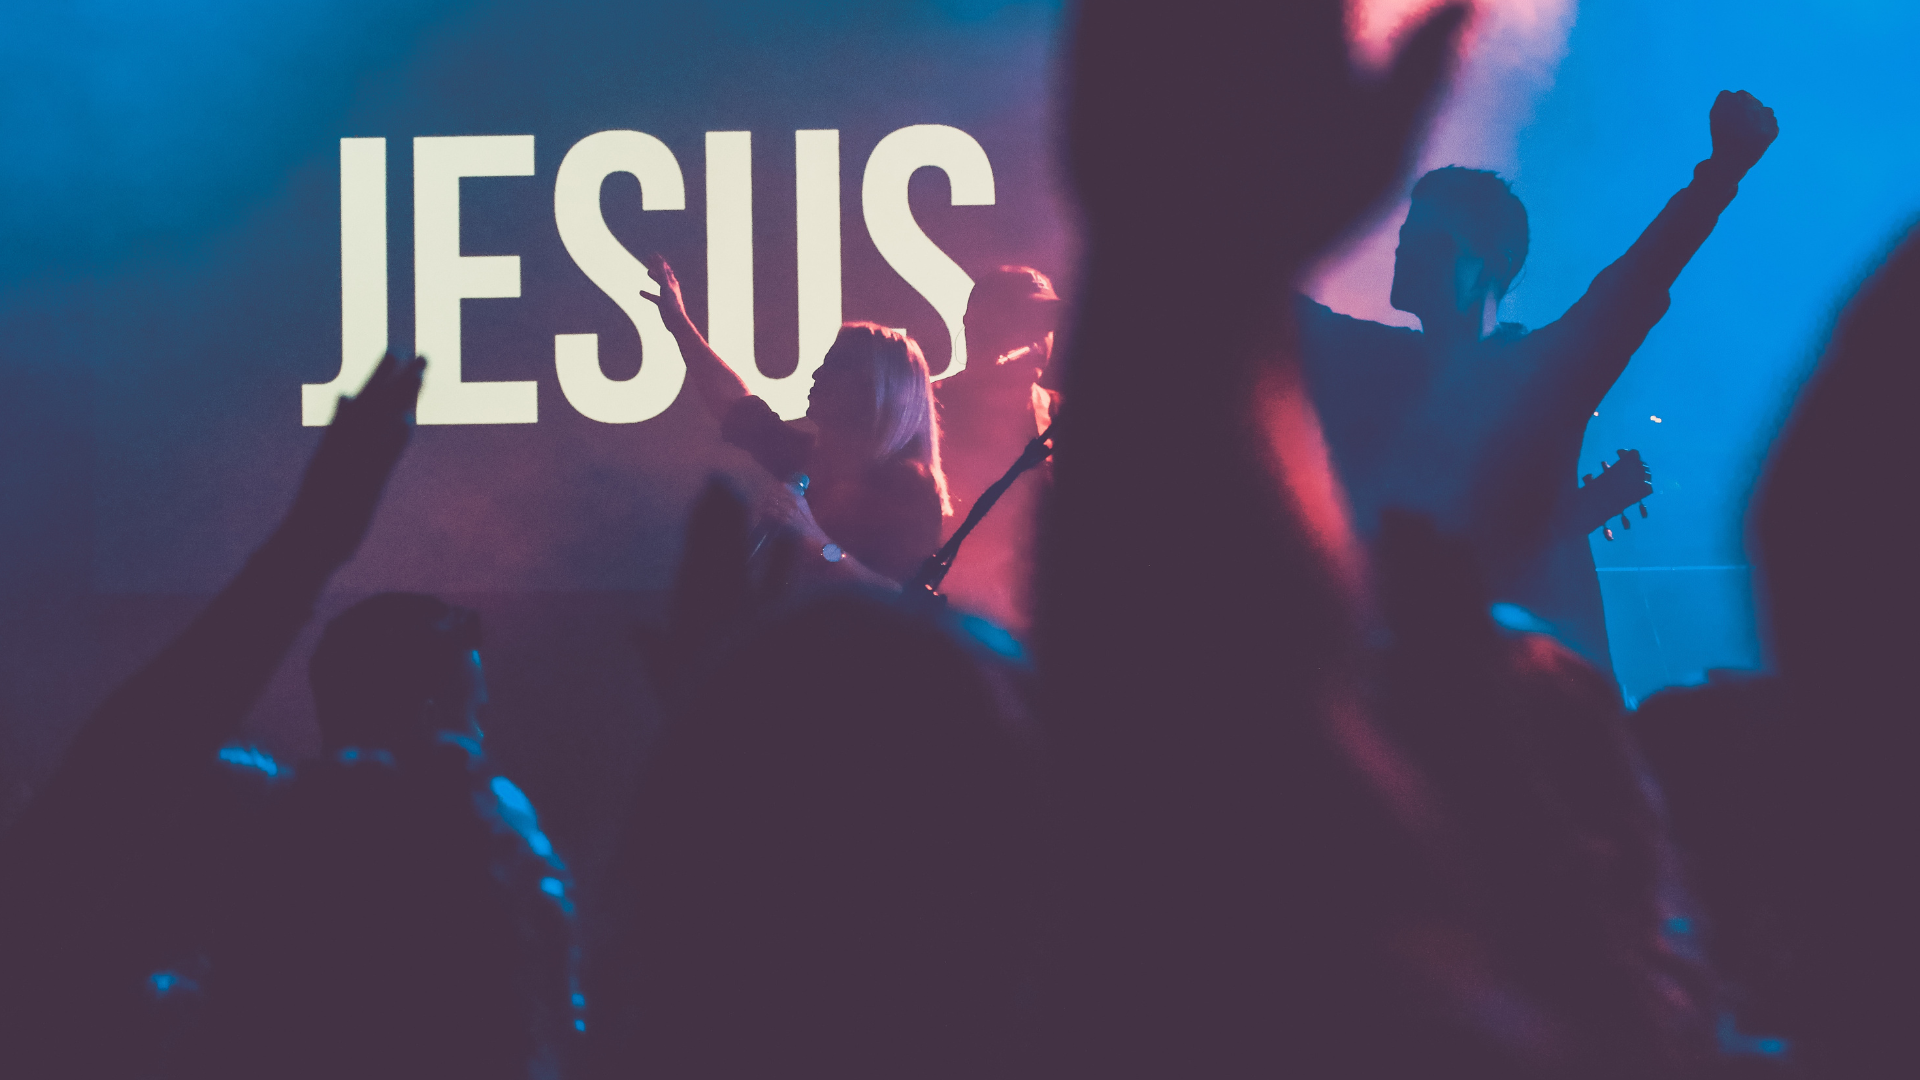 People standing at a worship event with their hands raised up in praise and the name of "Jesus" displayed on the screen on stage